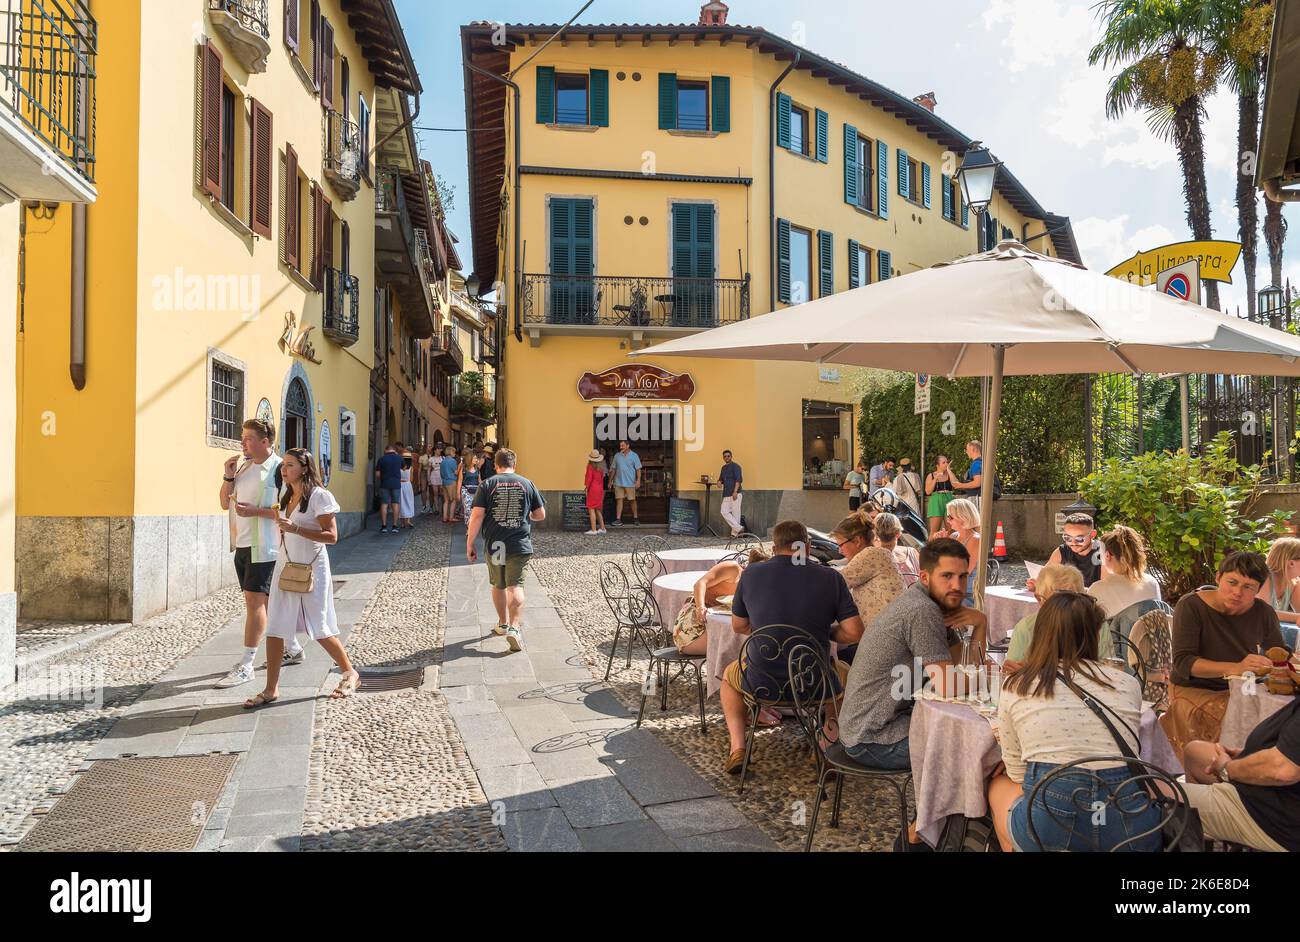 Bellagio, Lombardy, Italy - September 5, 2022: People visiting the picturesque small village Bellagio on Lake Como. Stock Photo